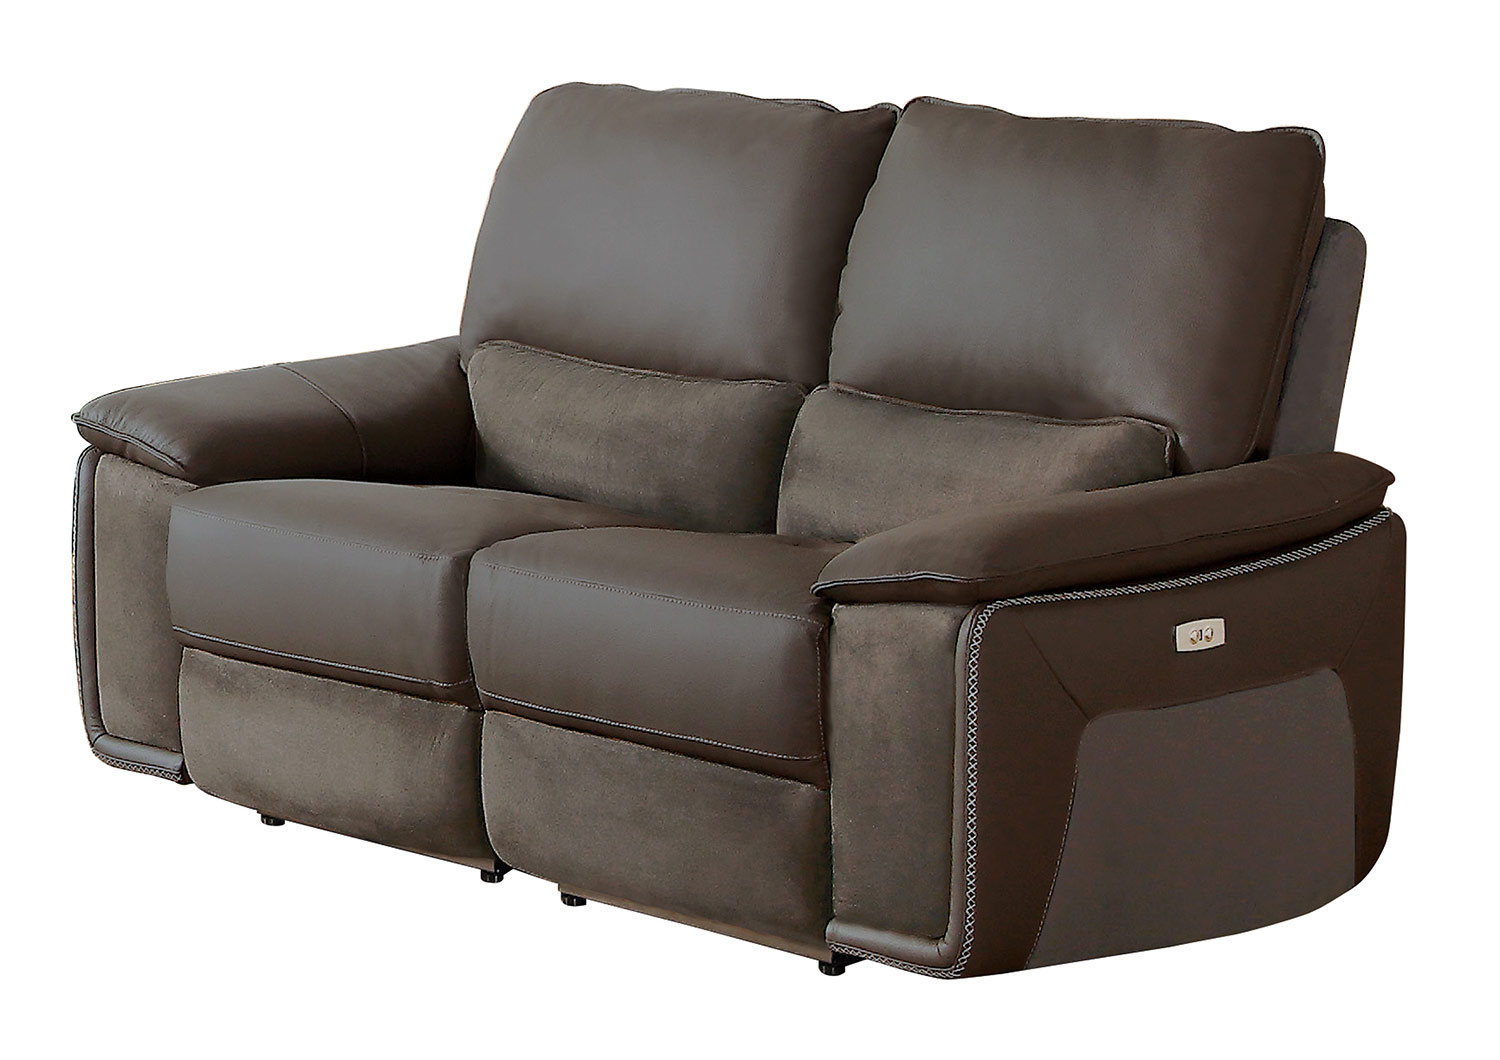 Homelegance Corazon Power Double Reclining Love Seat - Navy Gray Top Grain Leather/Fabric